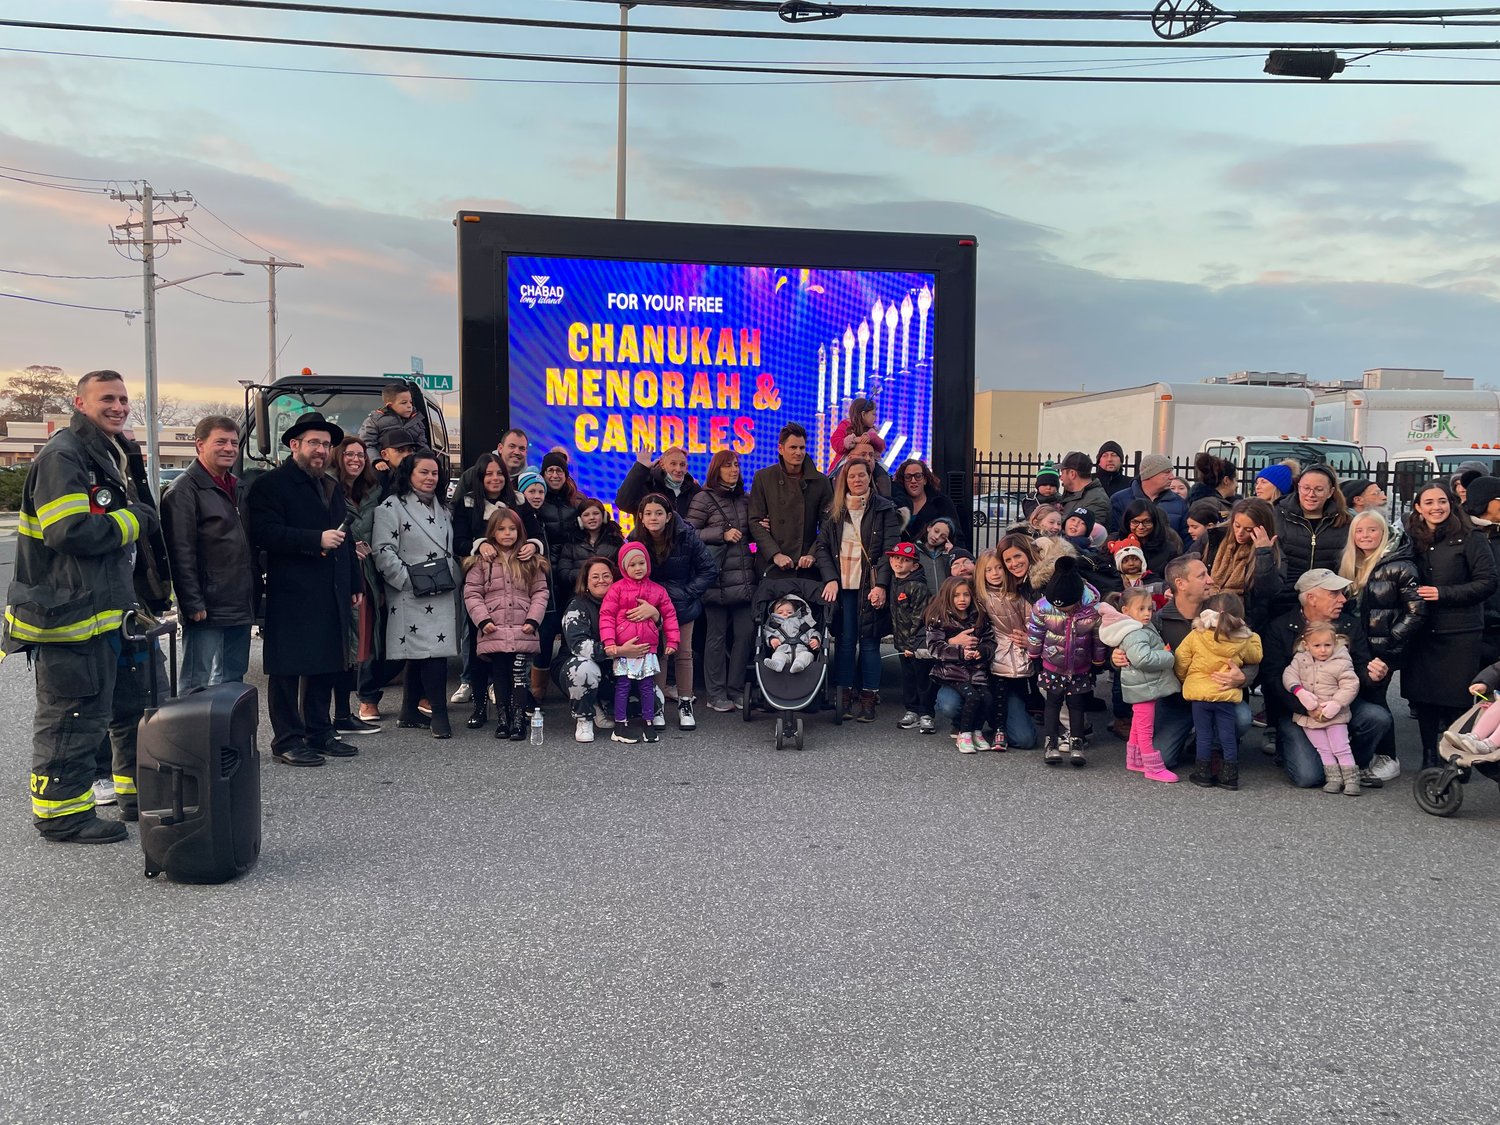 On Sunday, Bellmore-Merrick residents and Chabad members gathered before the start of the parade that celebrated the beginning of Hanukkah.